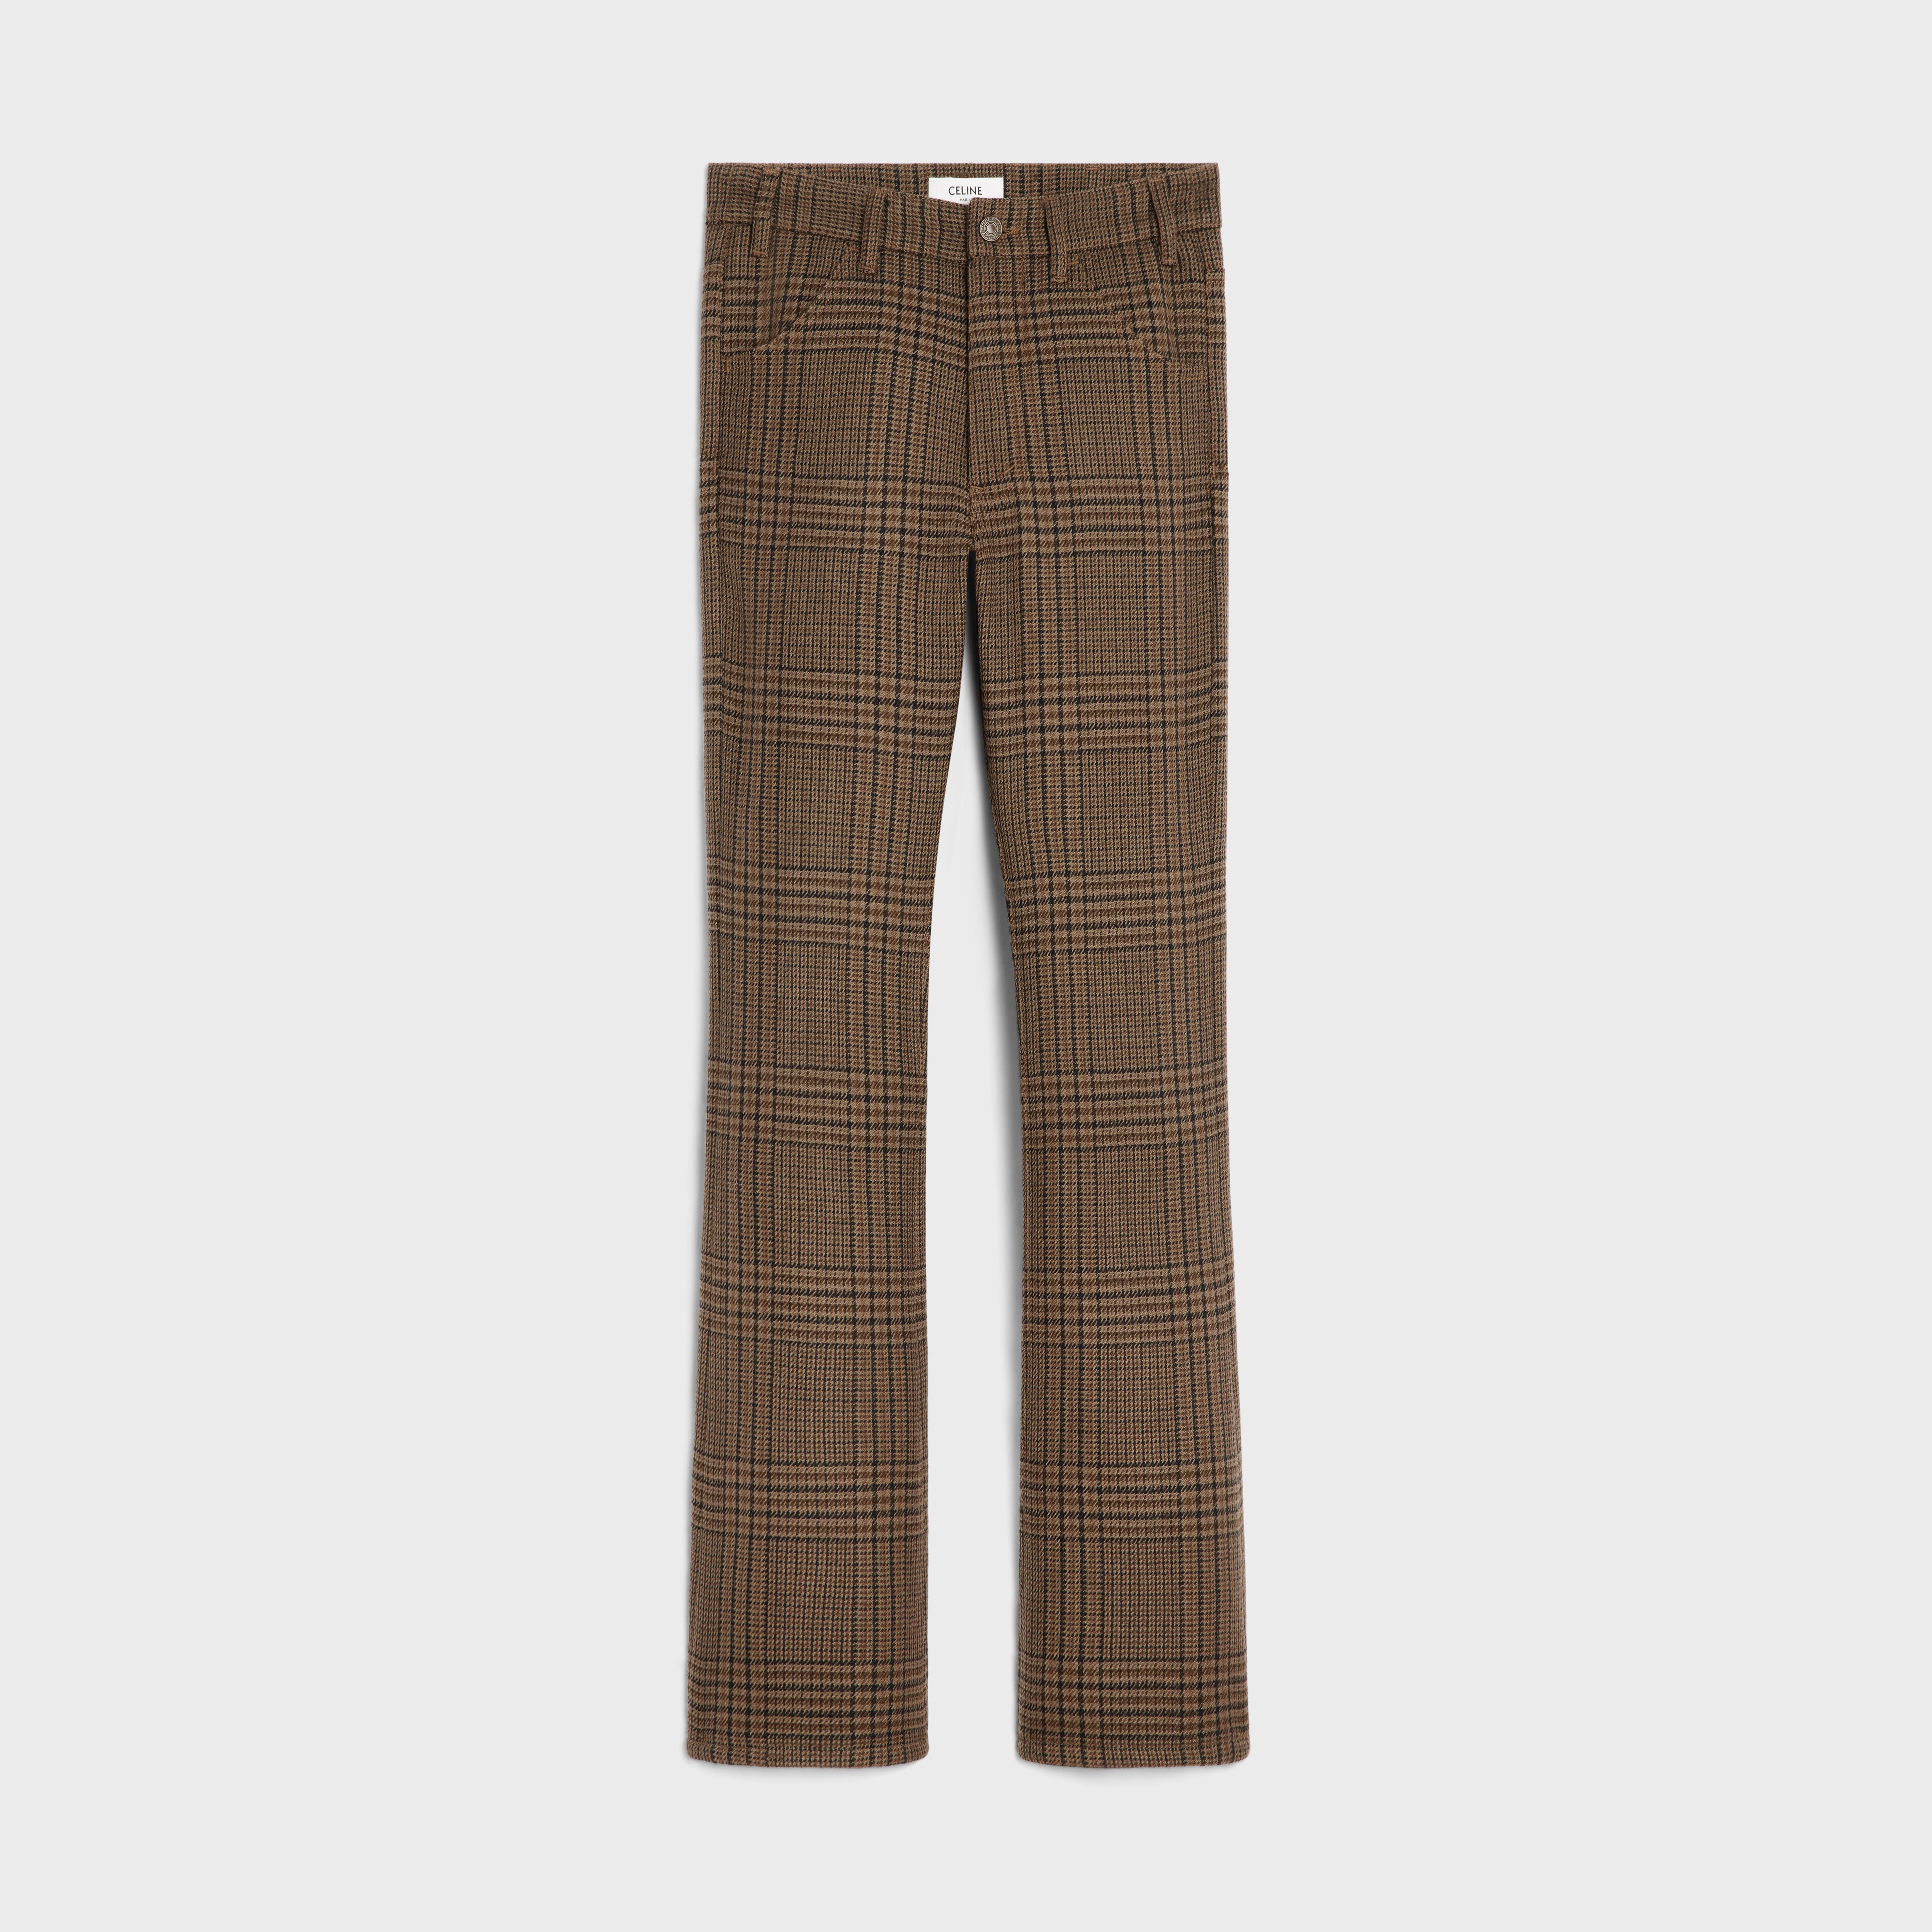 dylan flared jeans in prince of wales check wool - 1